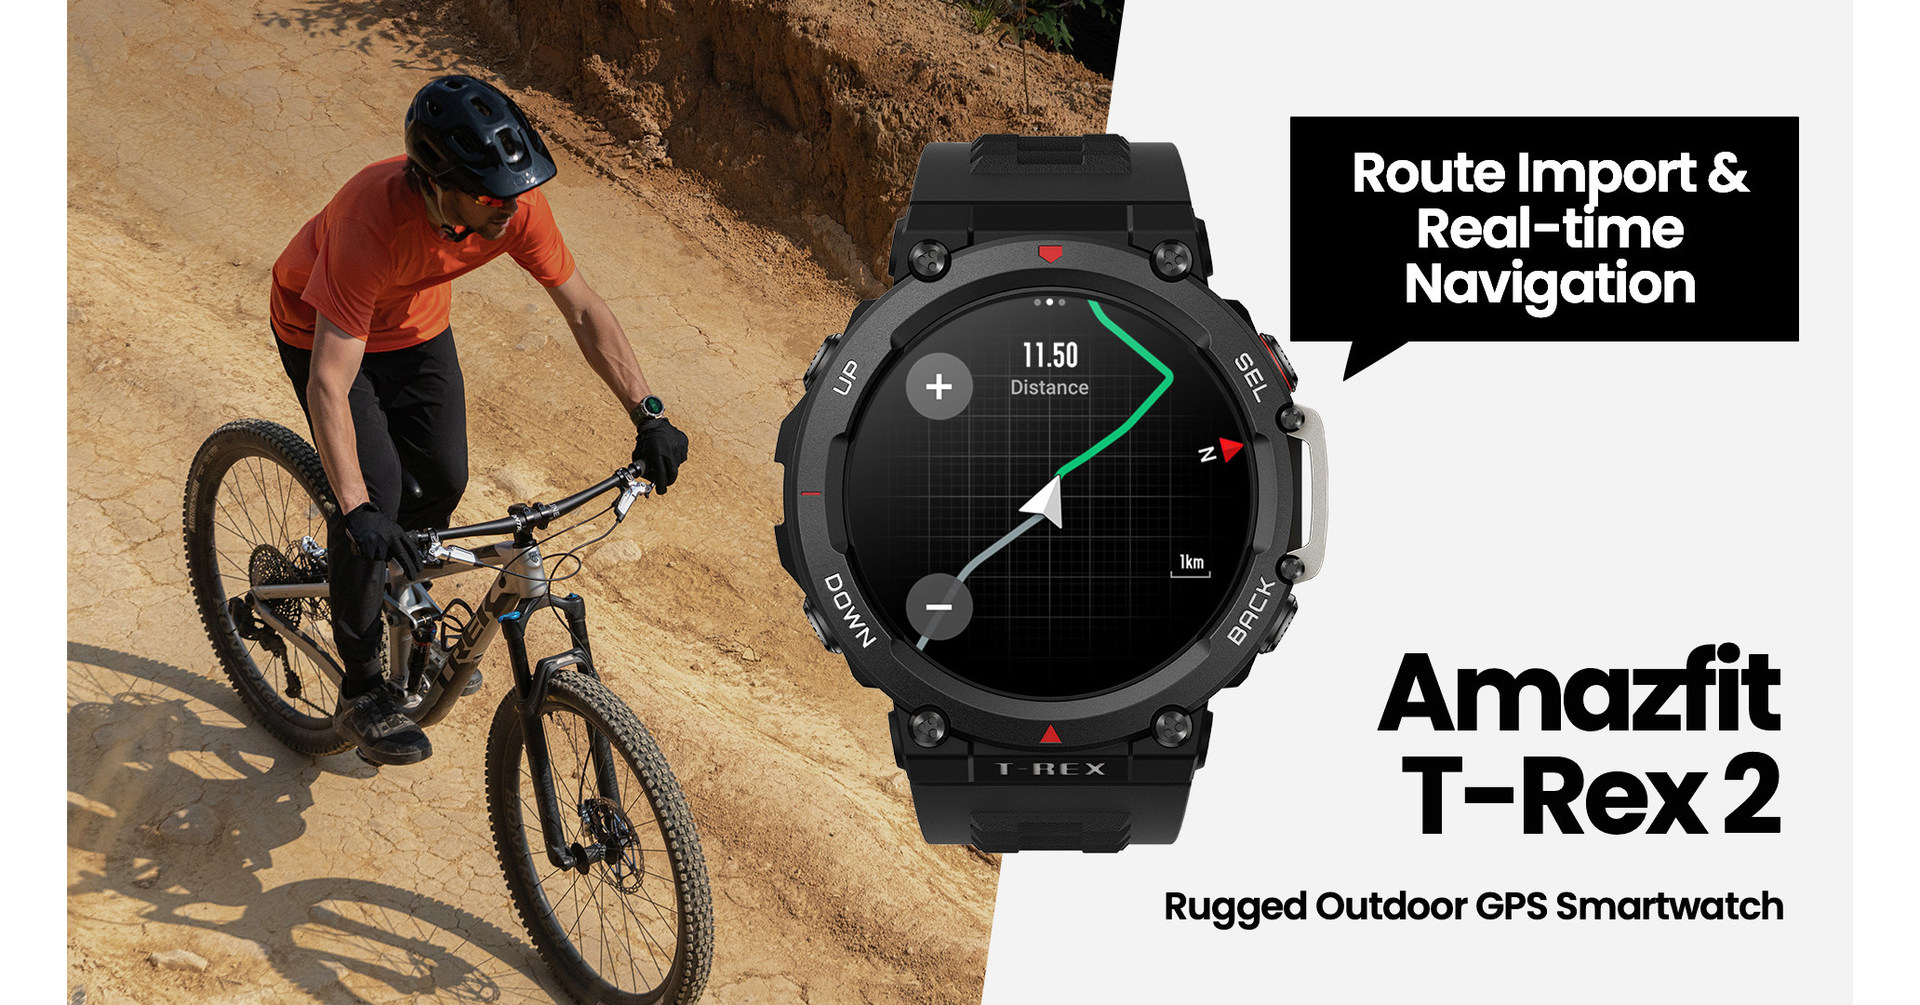 Amazfit T-Rex Pro Smart Watch for Men Rugged Outdoor India